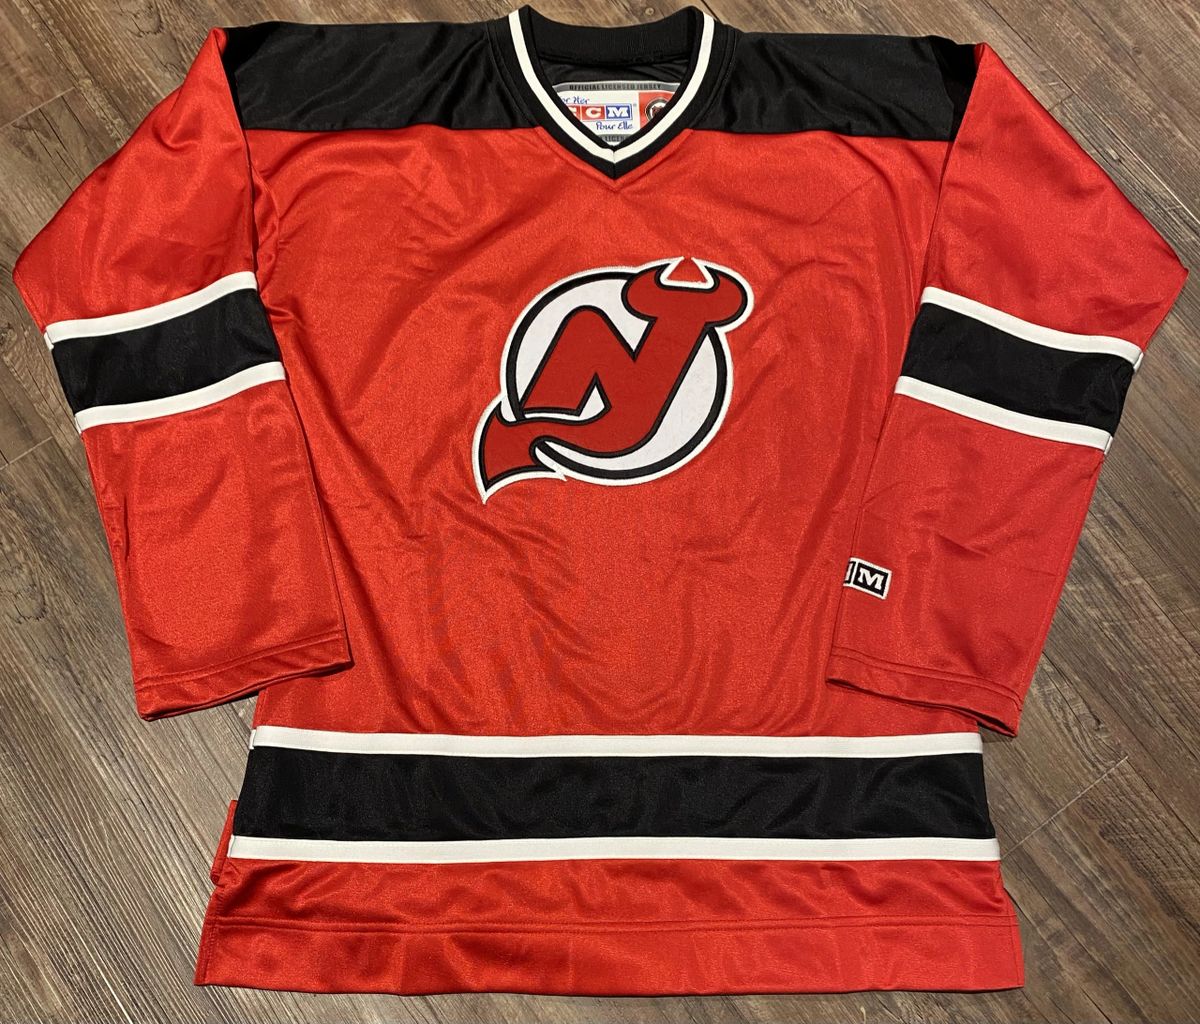 Monkeysports New Jersey Devils Uncrested Adult Hockey Jersey in Red Size X-Large